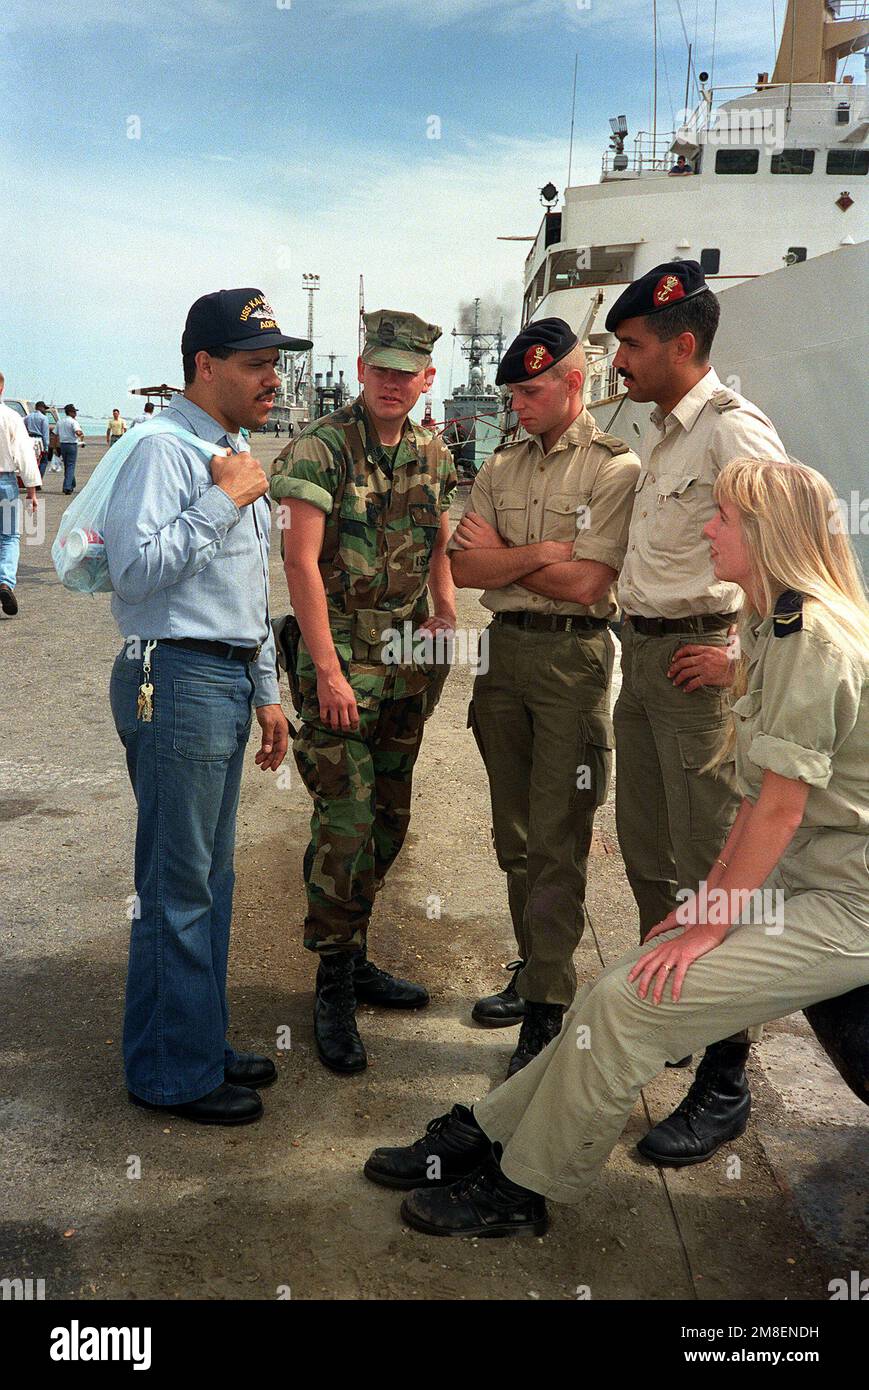 Postal Clerk 2nd Class Elliot Reyes, left, and Lance CPL. Mark A. Lamperi, second from left, talk with two Dutch marines and a Dutch sailor from the Dutch fast combat support ship HNLMS Zuiderkruis (A-832) while in port during Operation Desert Storm. Reyes serves aboard the replenishment oiler USS KALAMAZOO (AOR-6); Lamperi is a member of Fleet Anti-terrorist Security Team (FAST) Company, Pacific. Subject Operation/Series: DESERT STORM Country: Bahrain (BHR) Stock Photo